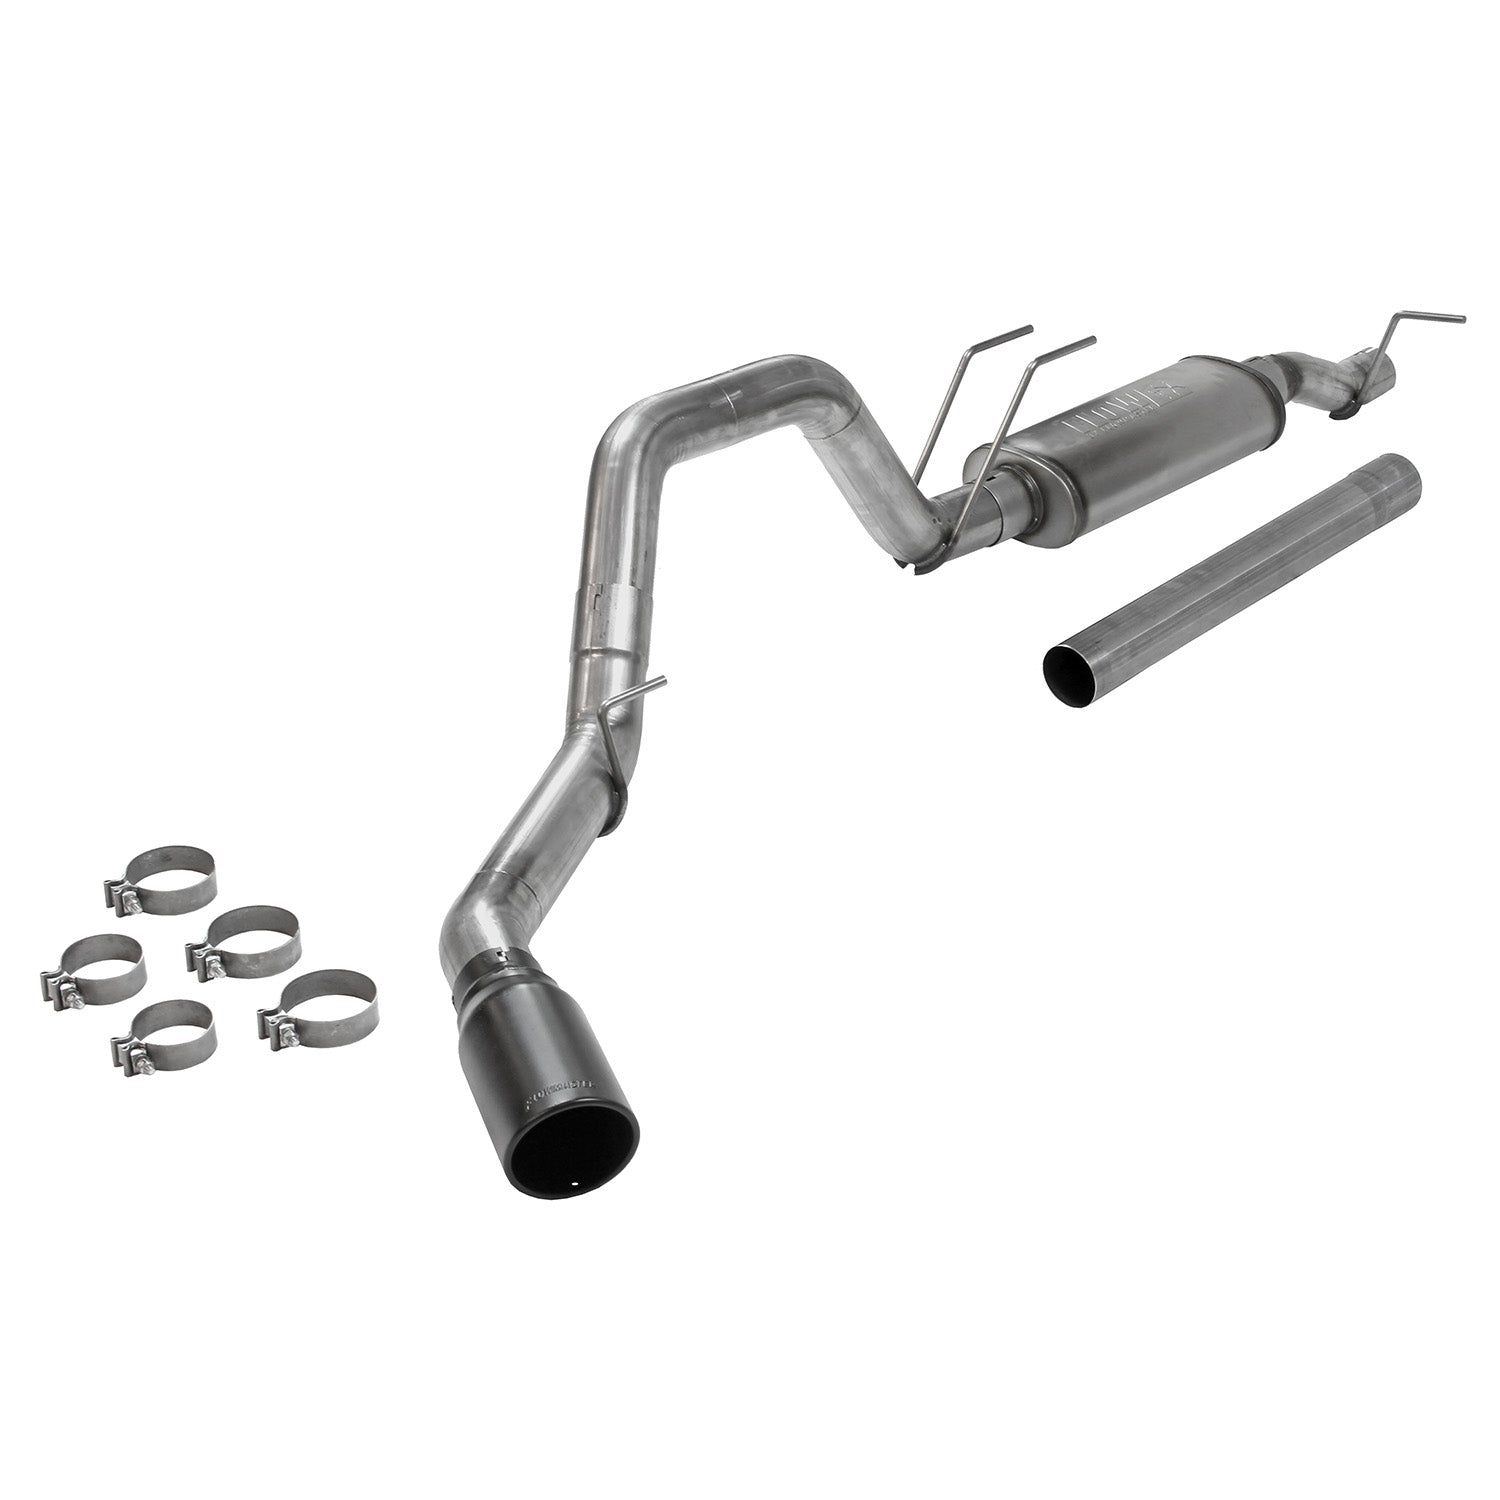 Flowmaster Ford (6.2, 7.3) Exhaust System Kit 717943